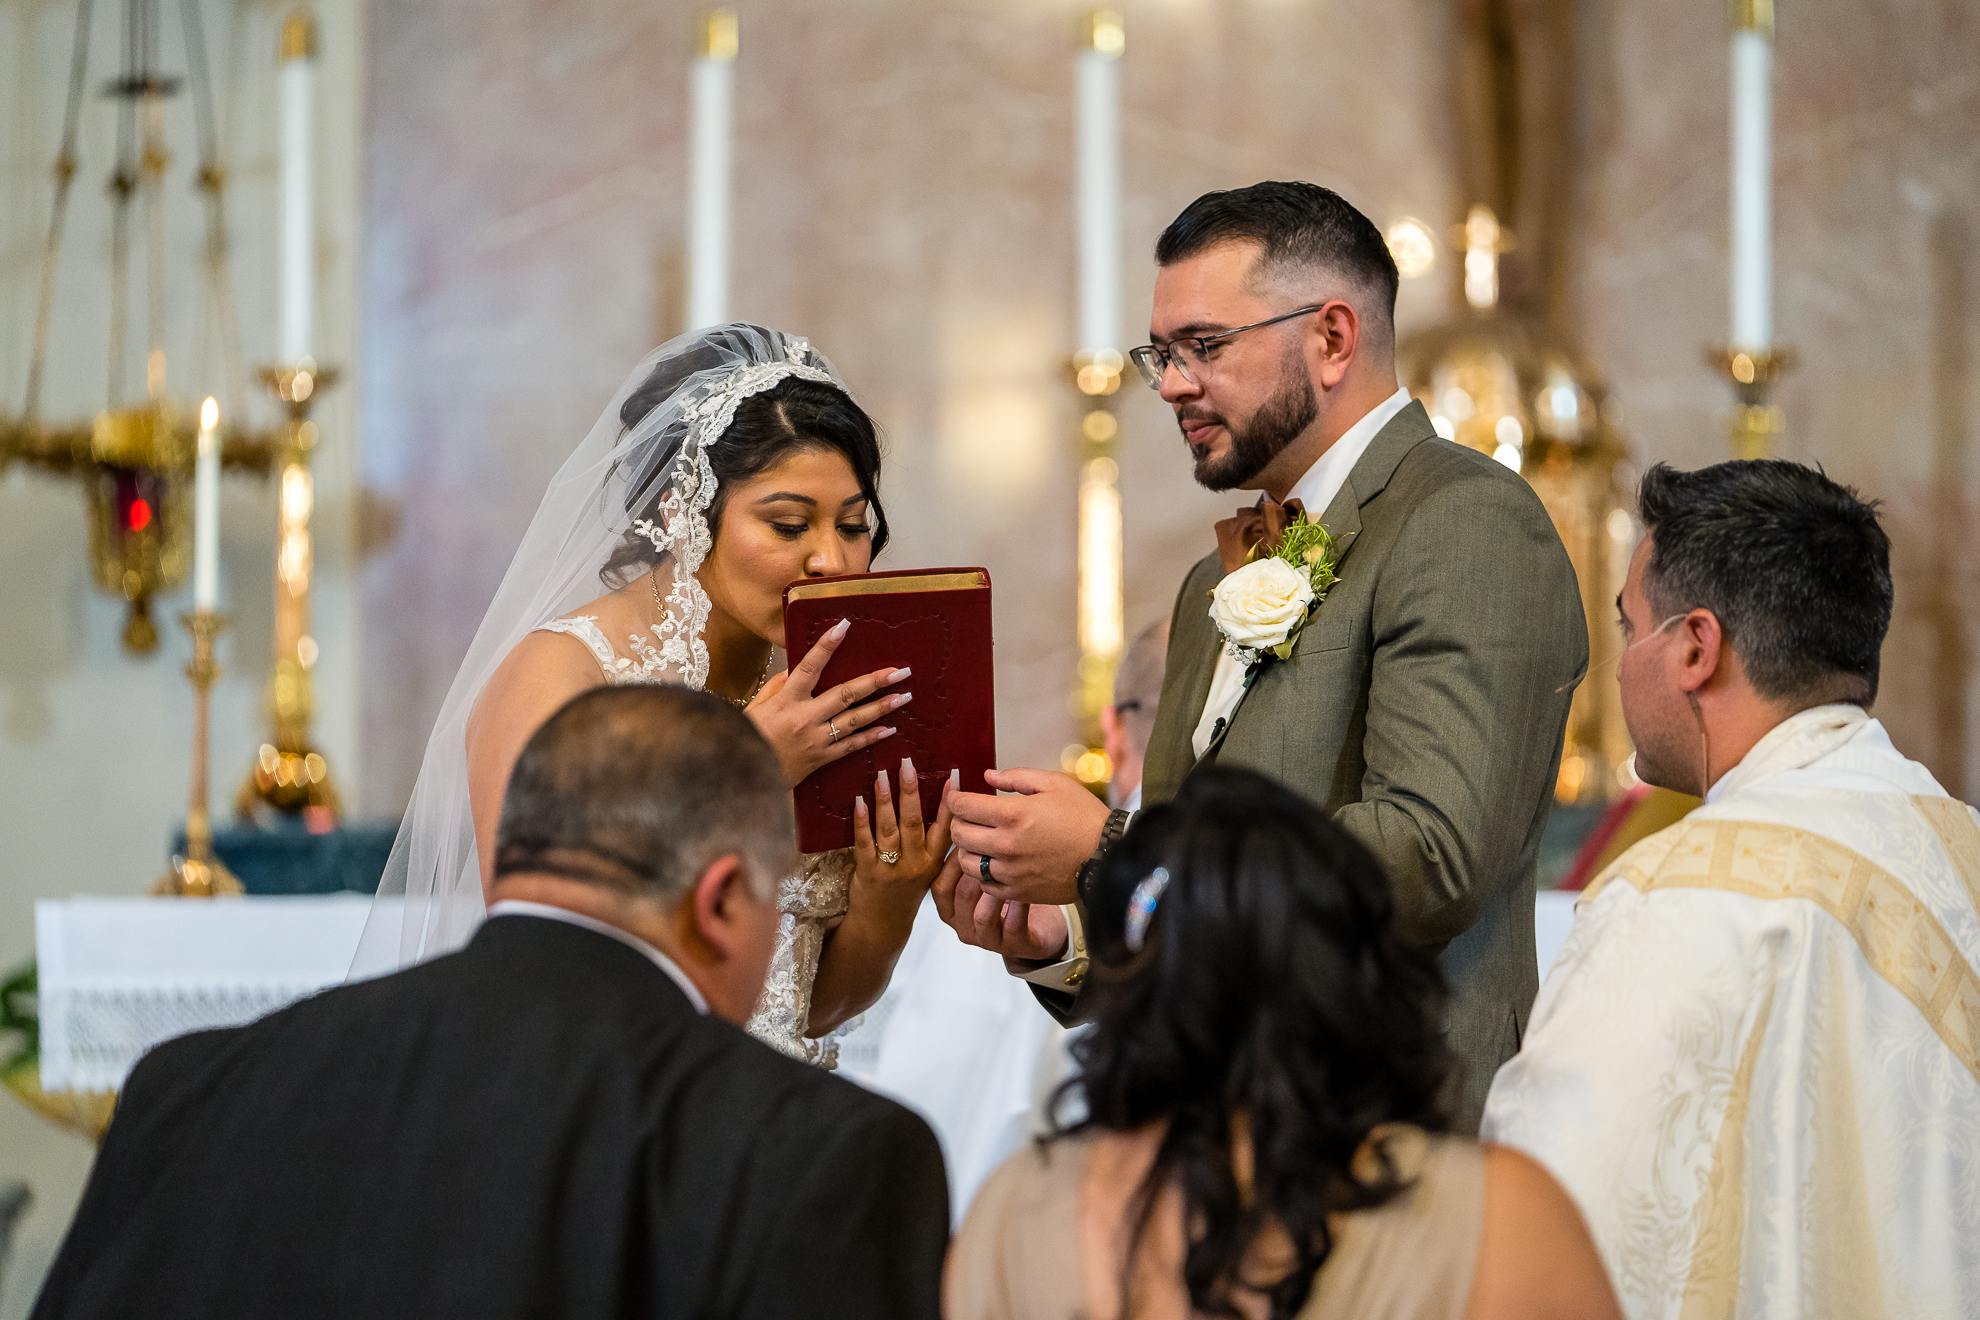 ThomasKim_photography A bride and groom exchange their wedding vows in a church. (S & A)